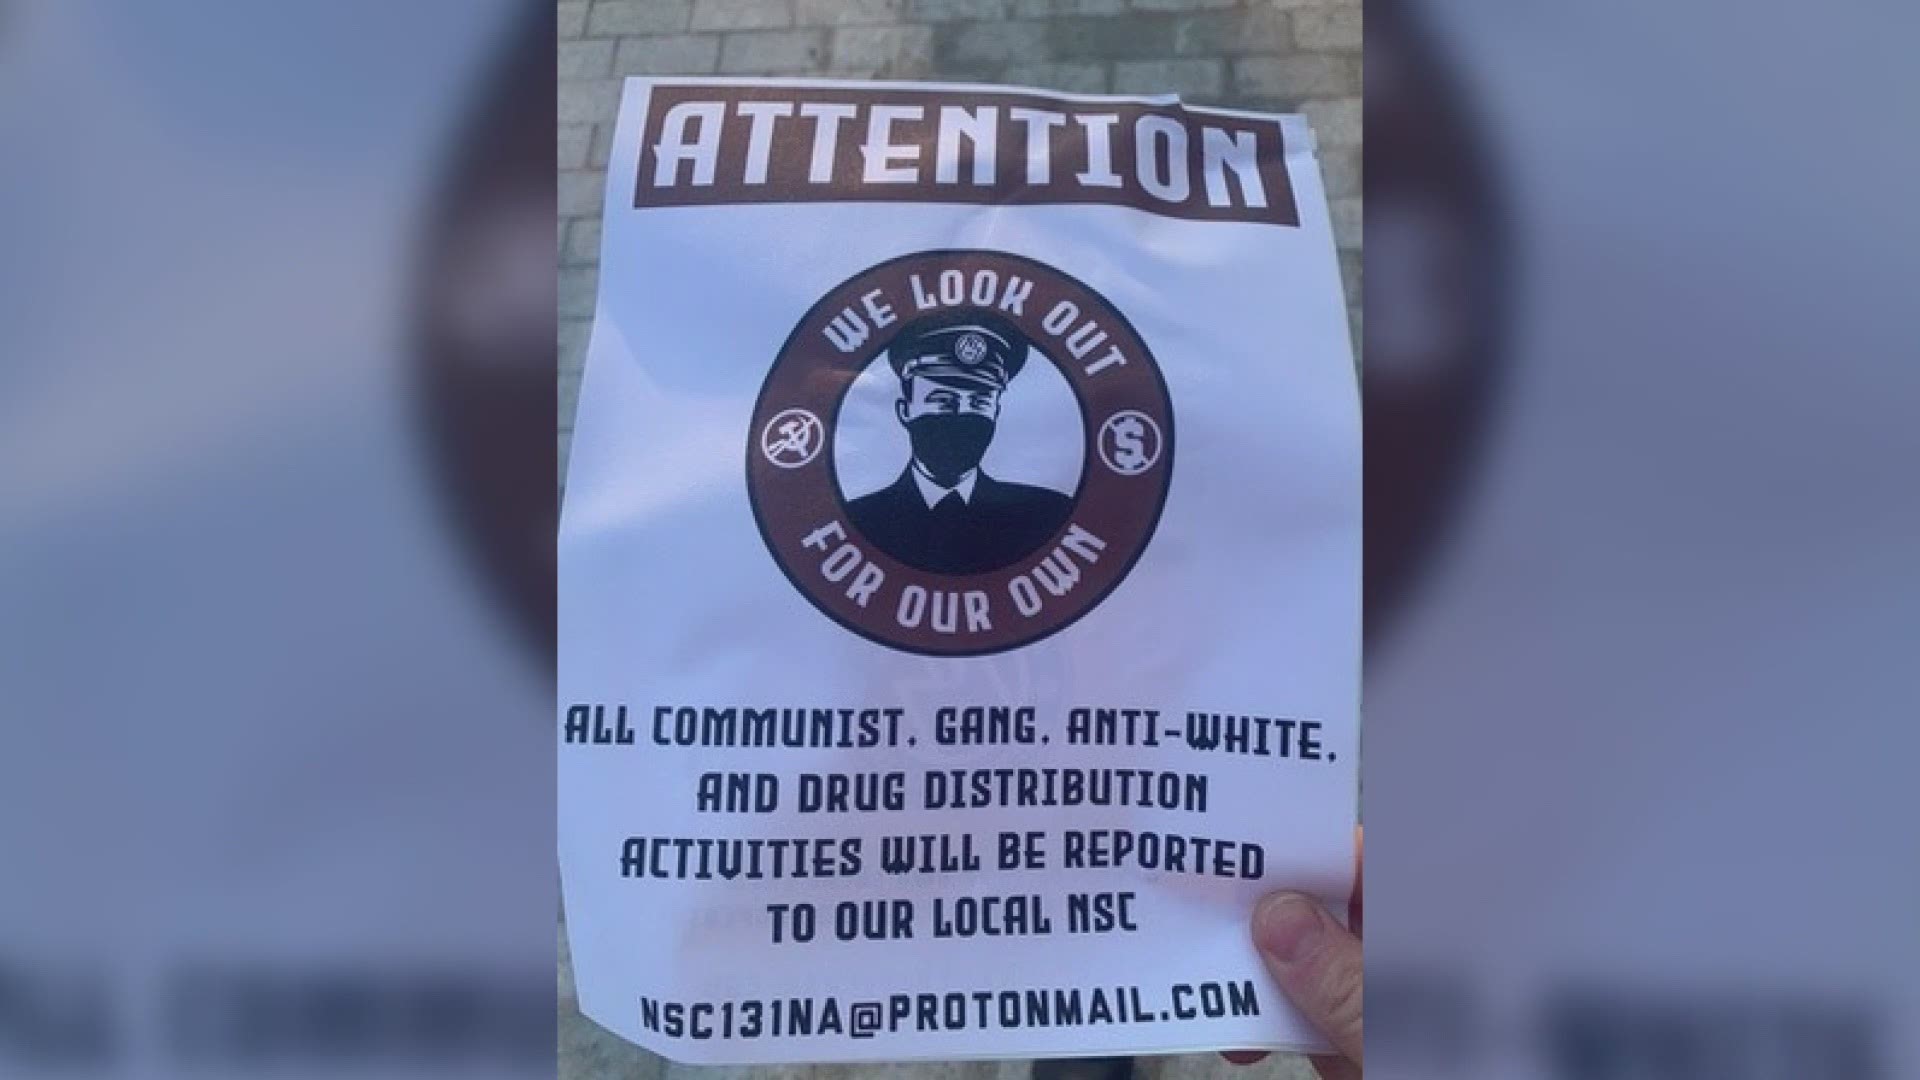 Portland police say two flyers were posted on private property on gray street addressed to "White men."